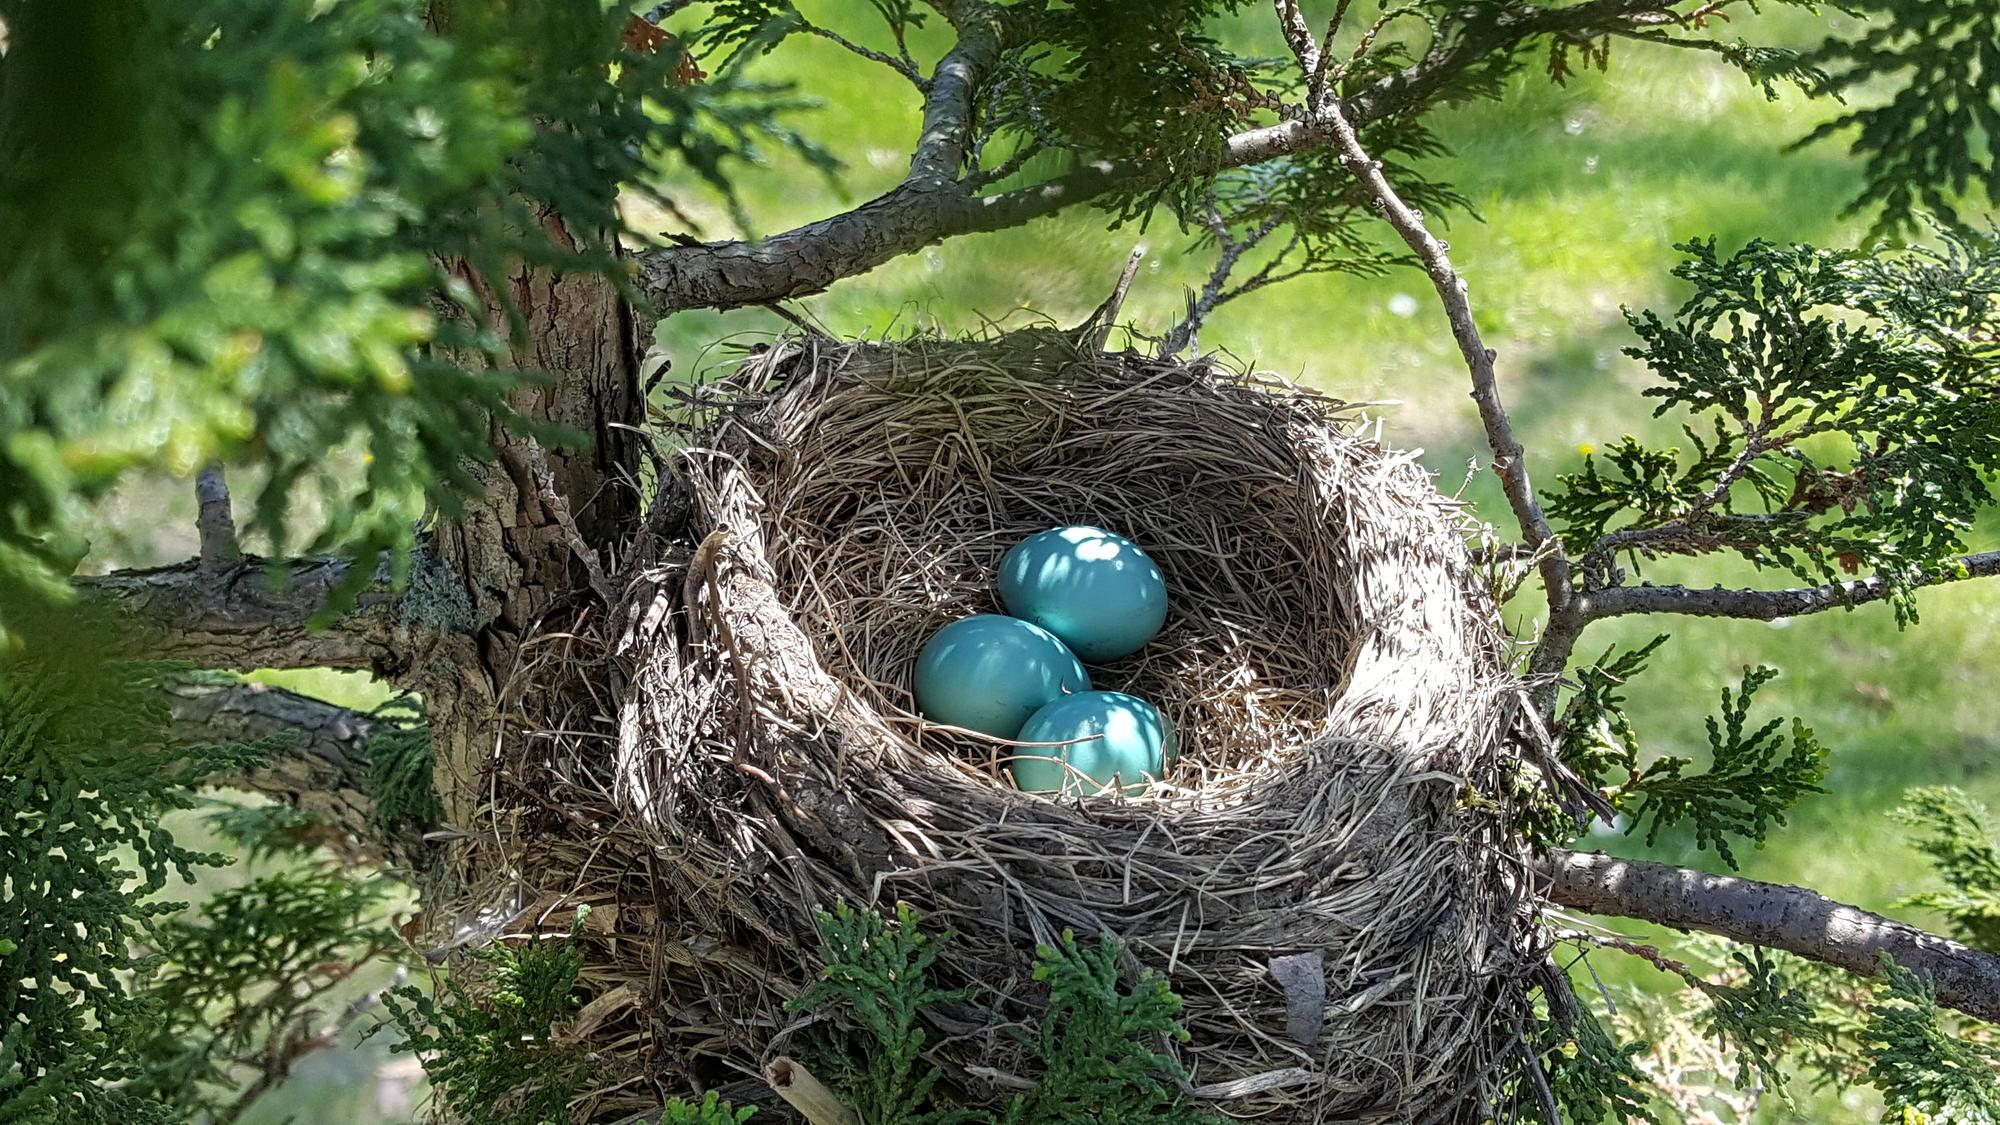 A robin's nest with three blue eggs.